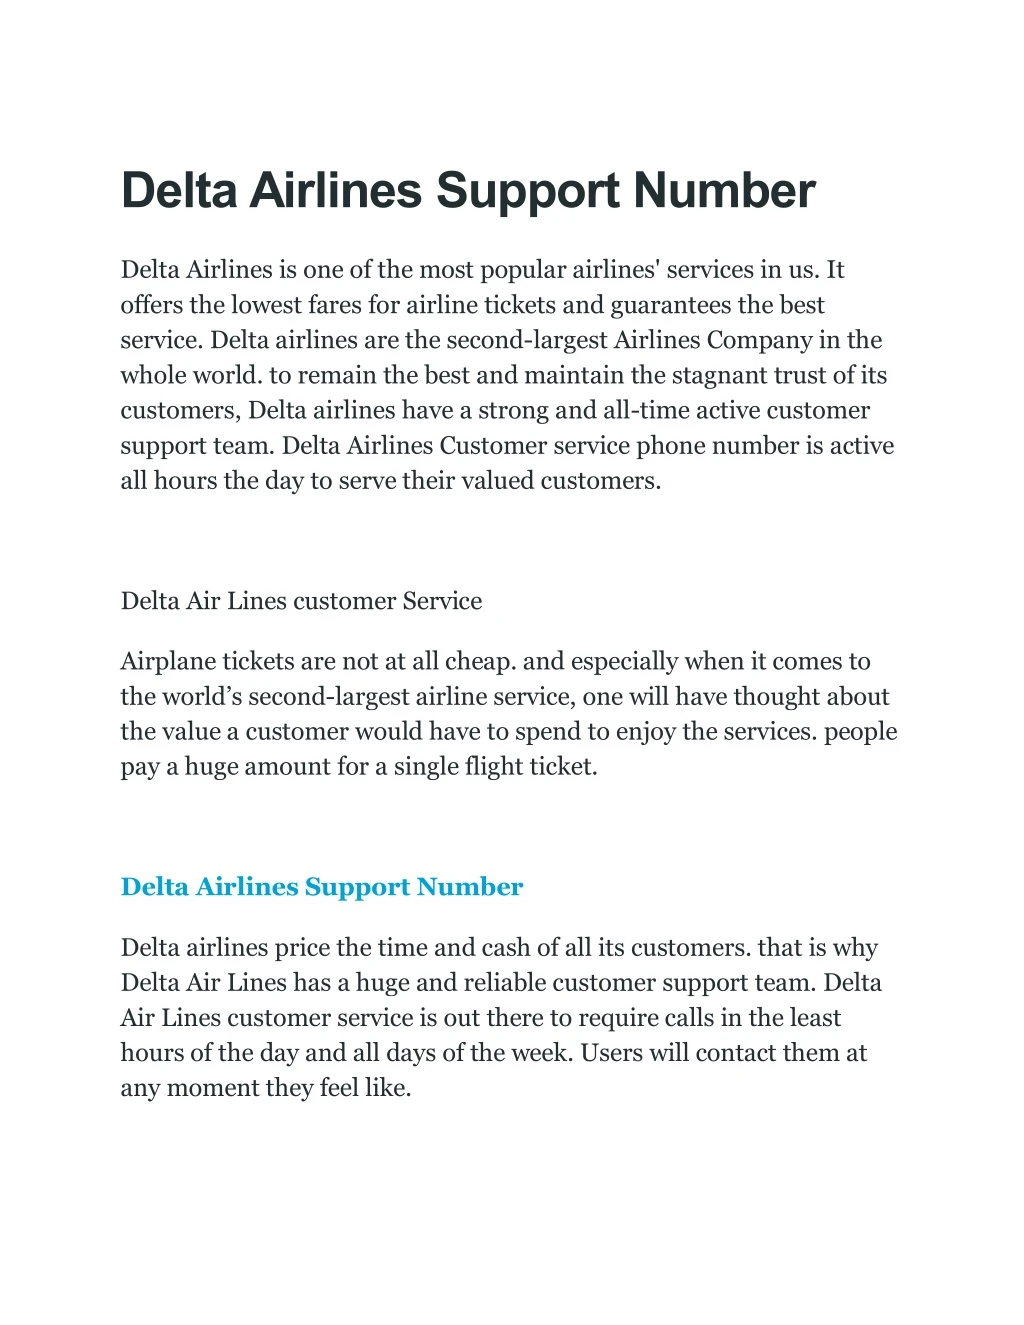 delta airlines support number